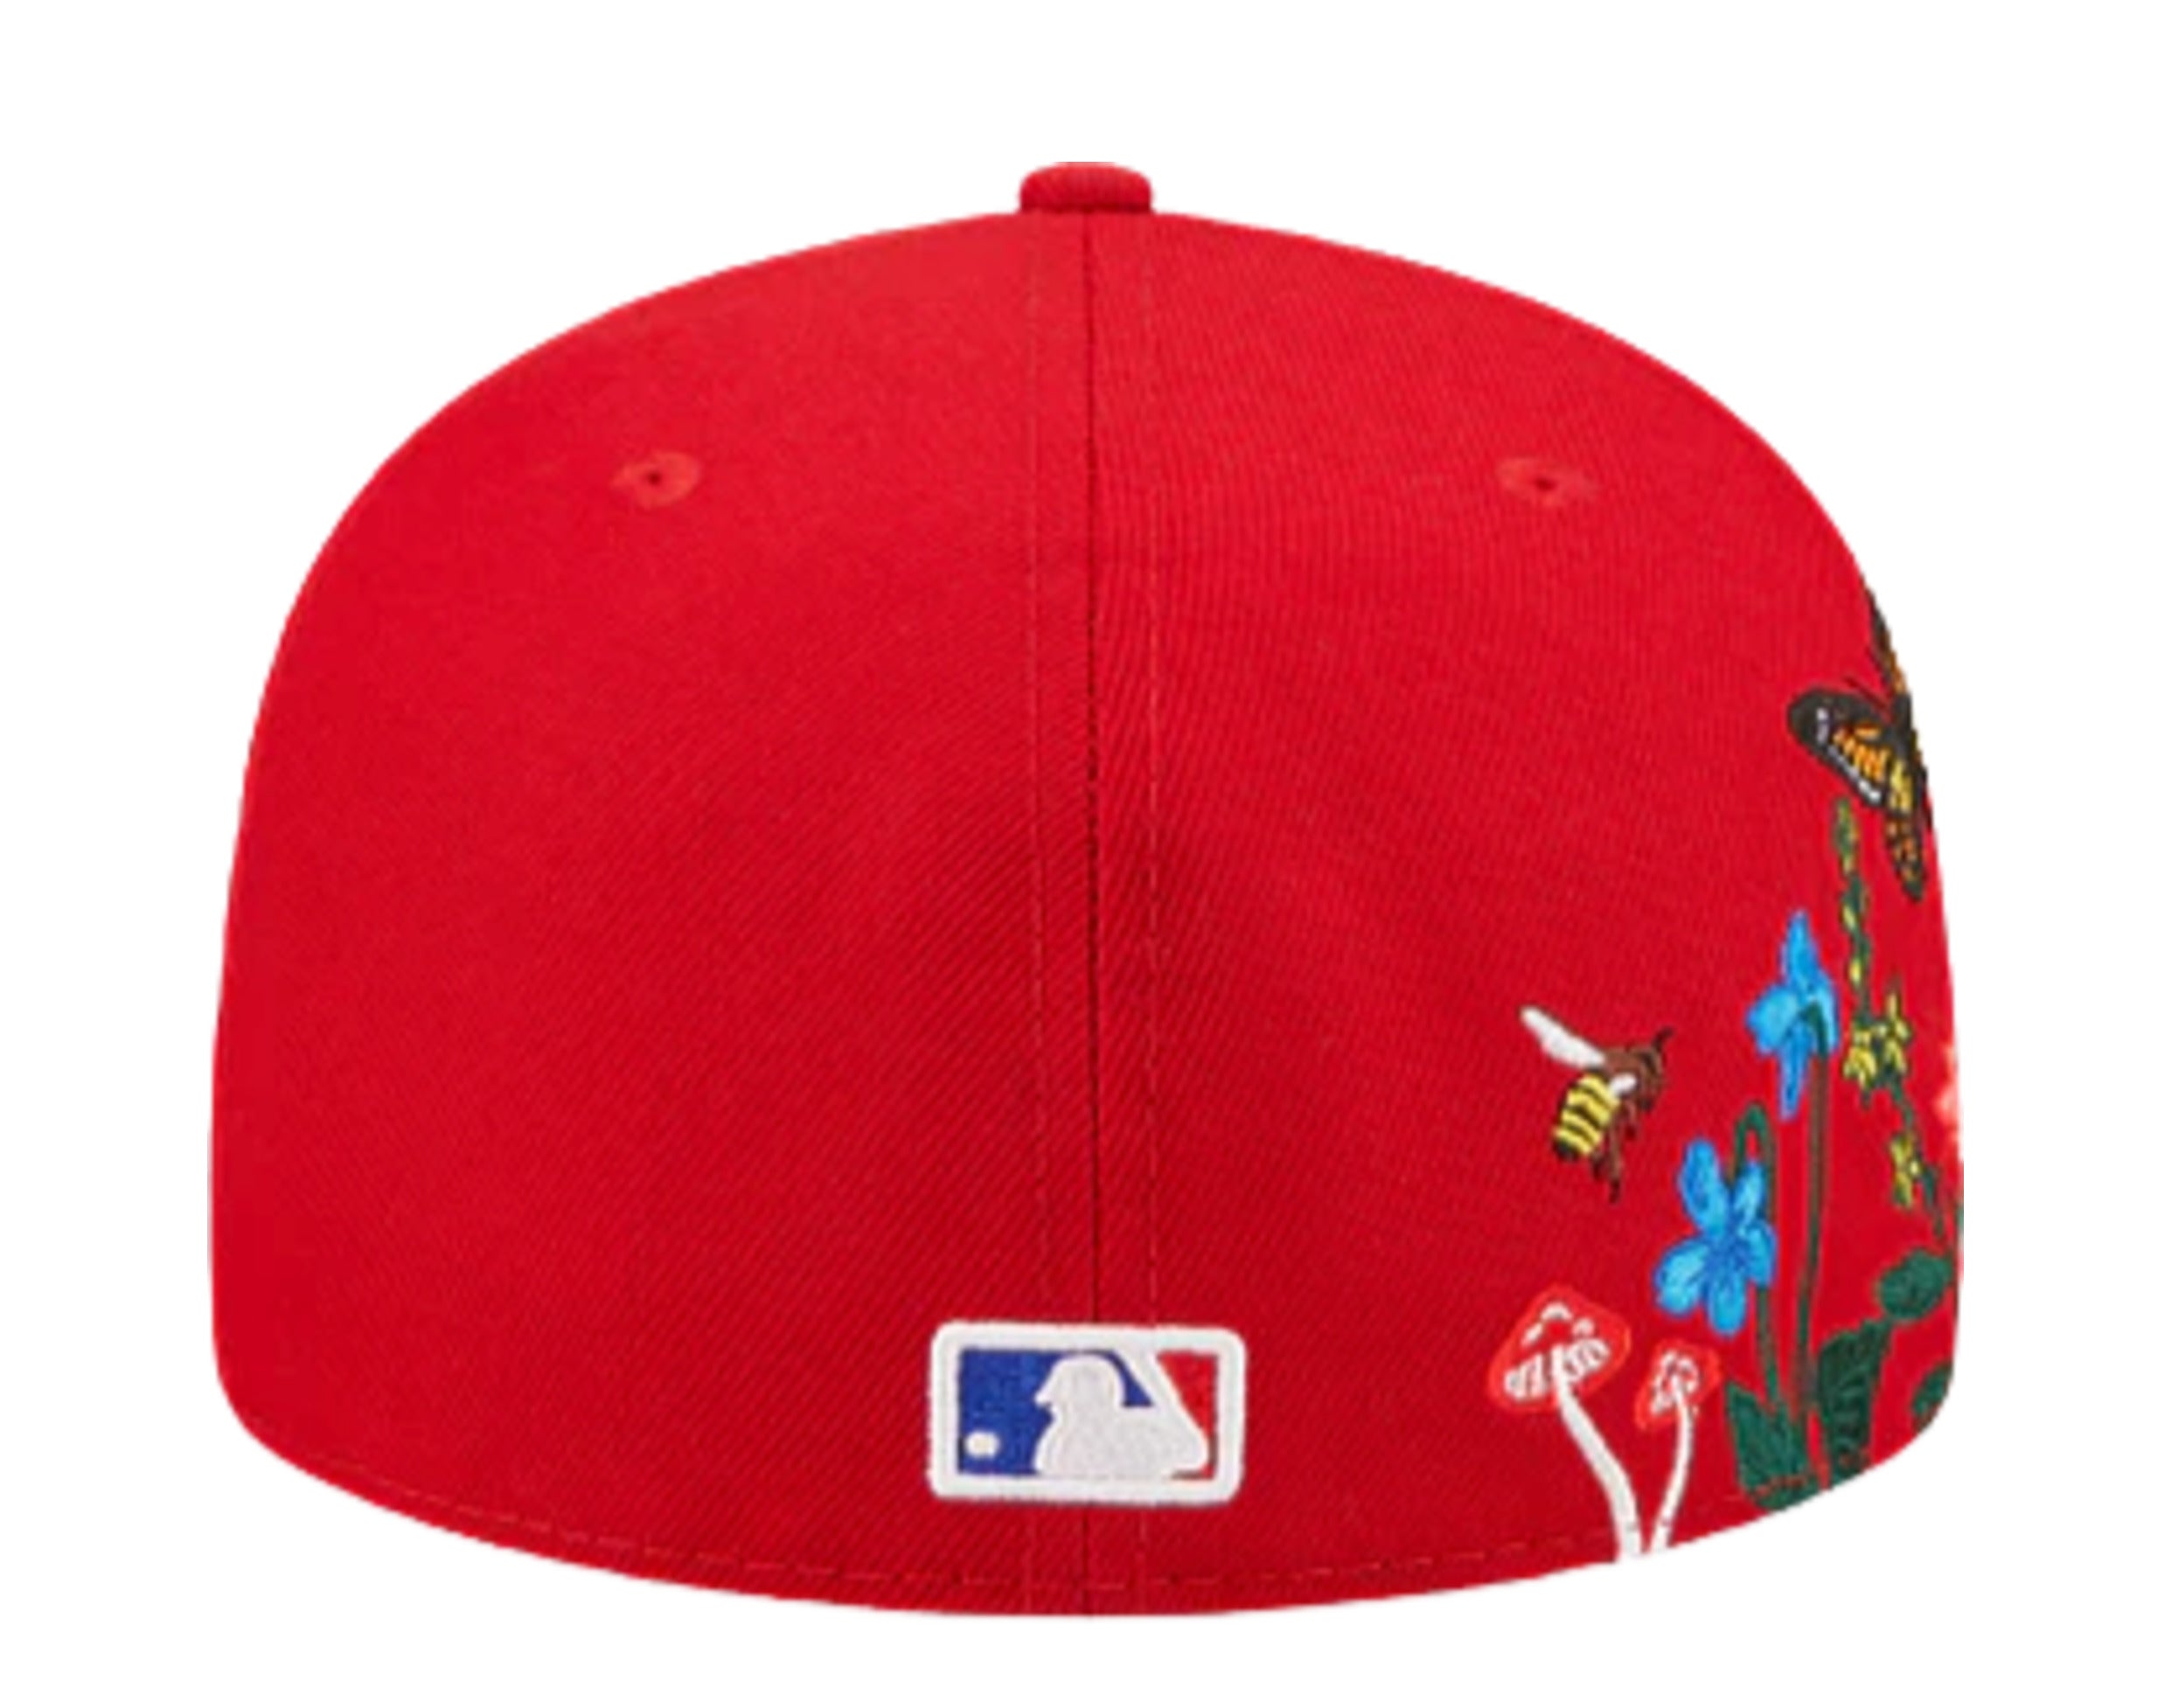 New Era Blooming 59FIFTY St Louis Cardinals Fitted Hat 7